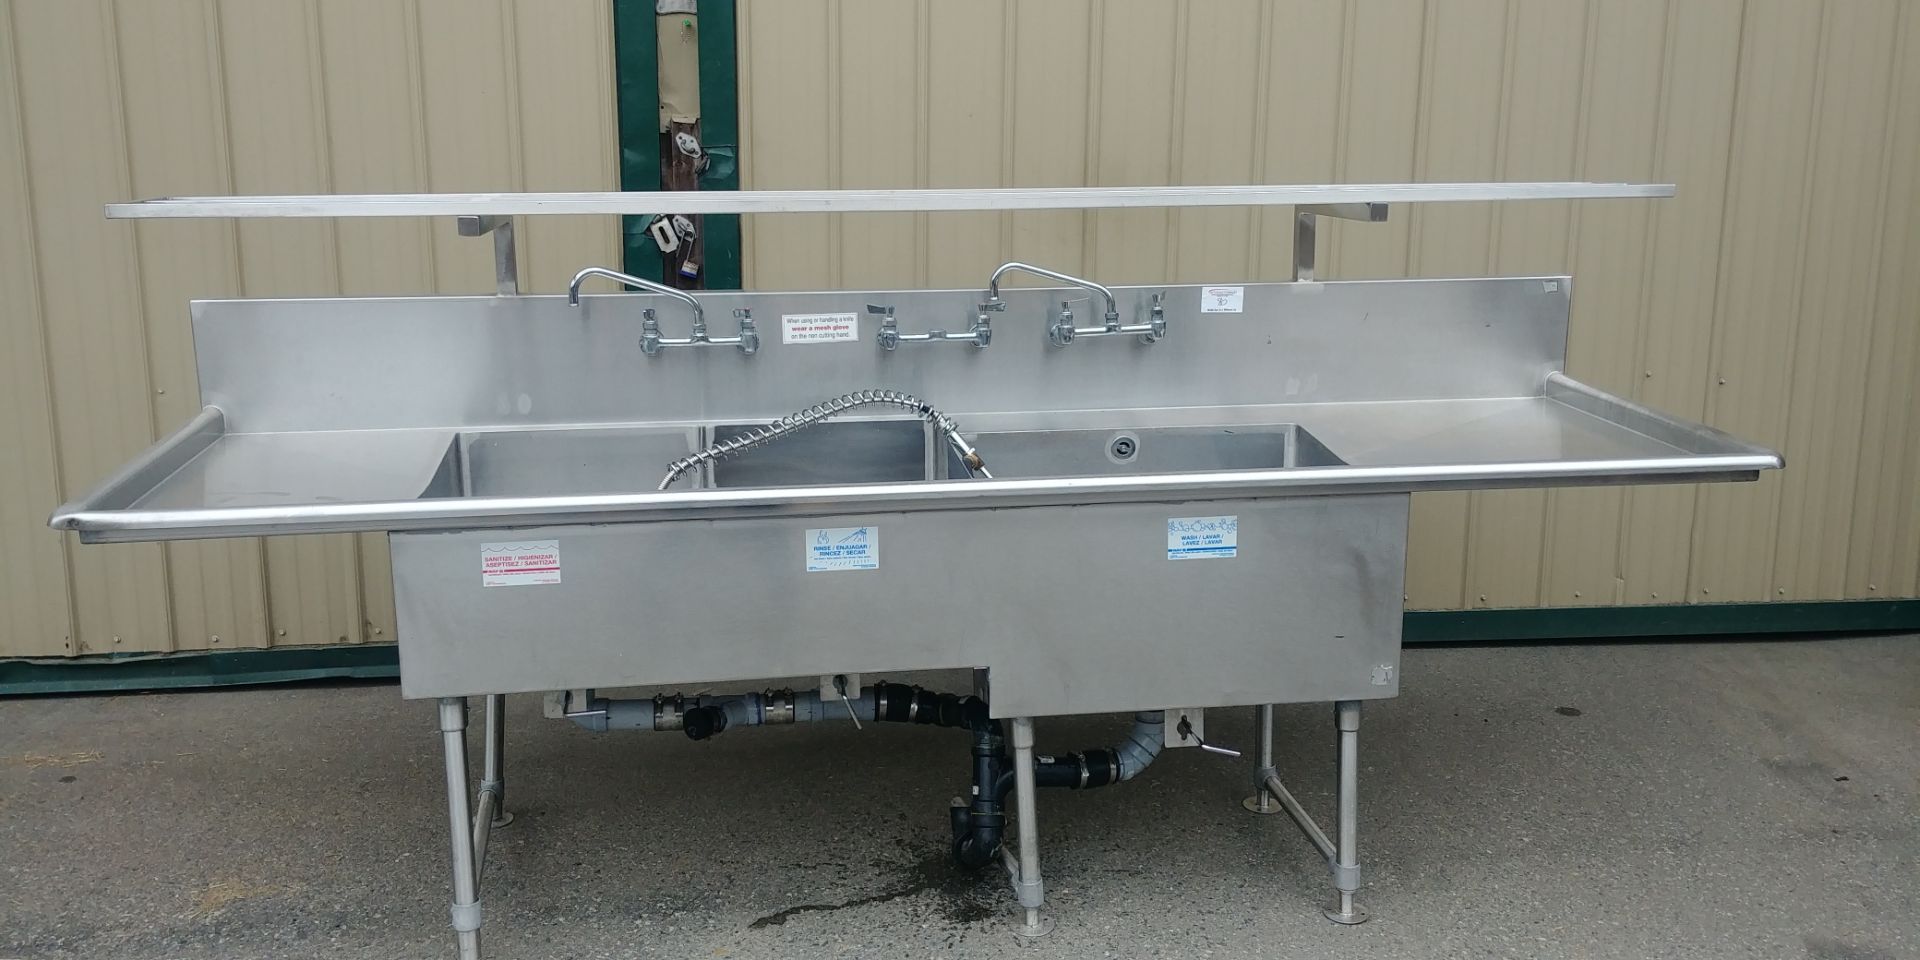 118 x 36" - 3 Well Stainless Steel Sink with Wash Wand and Overshelf - Original Cost over $5000.00